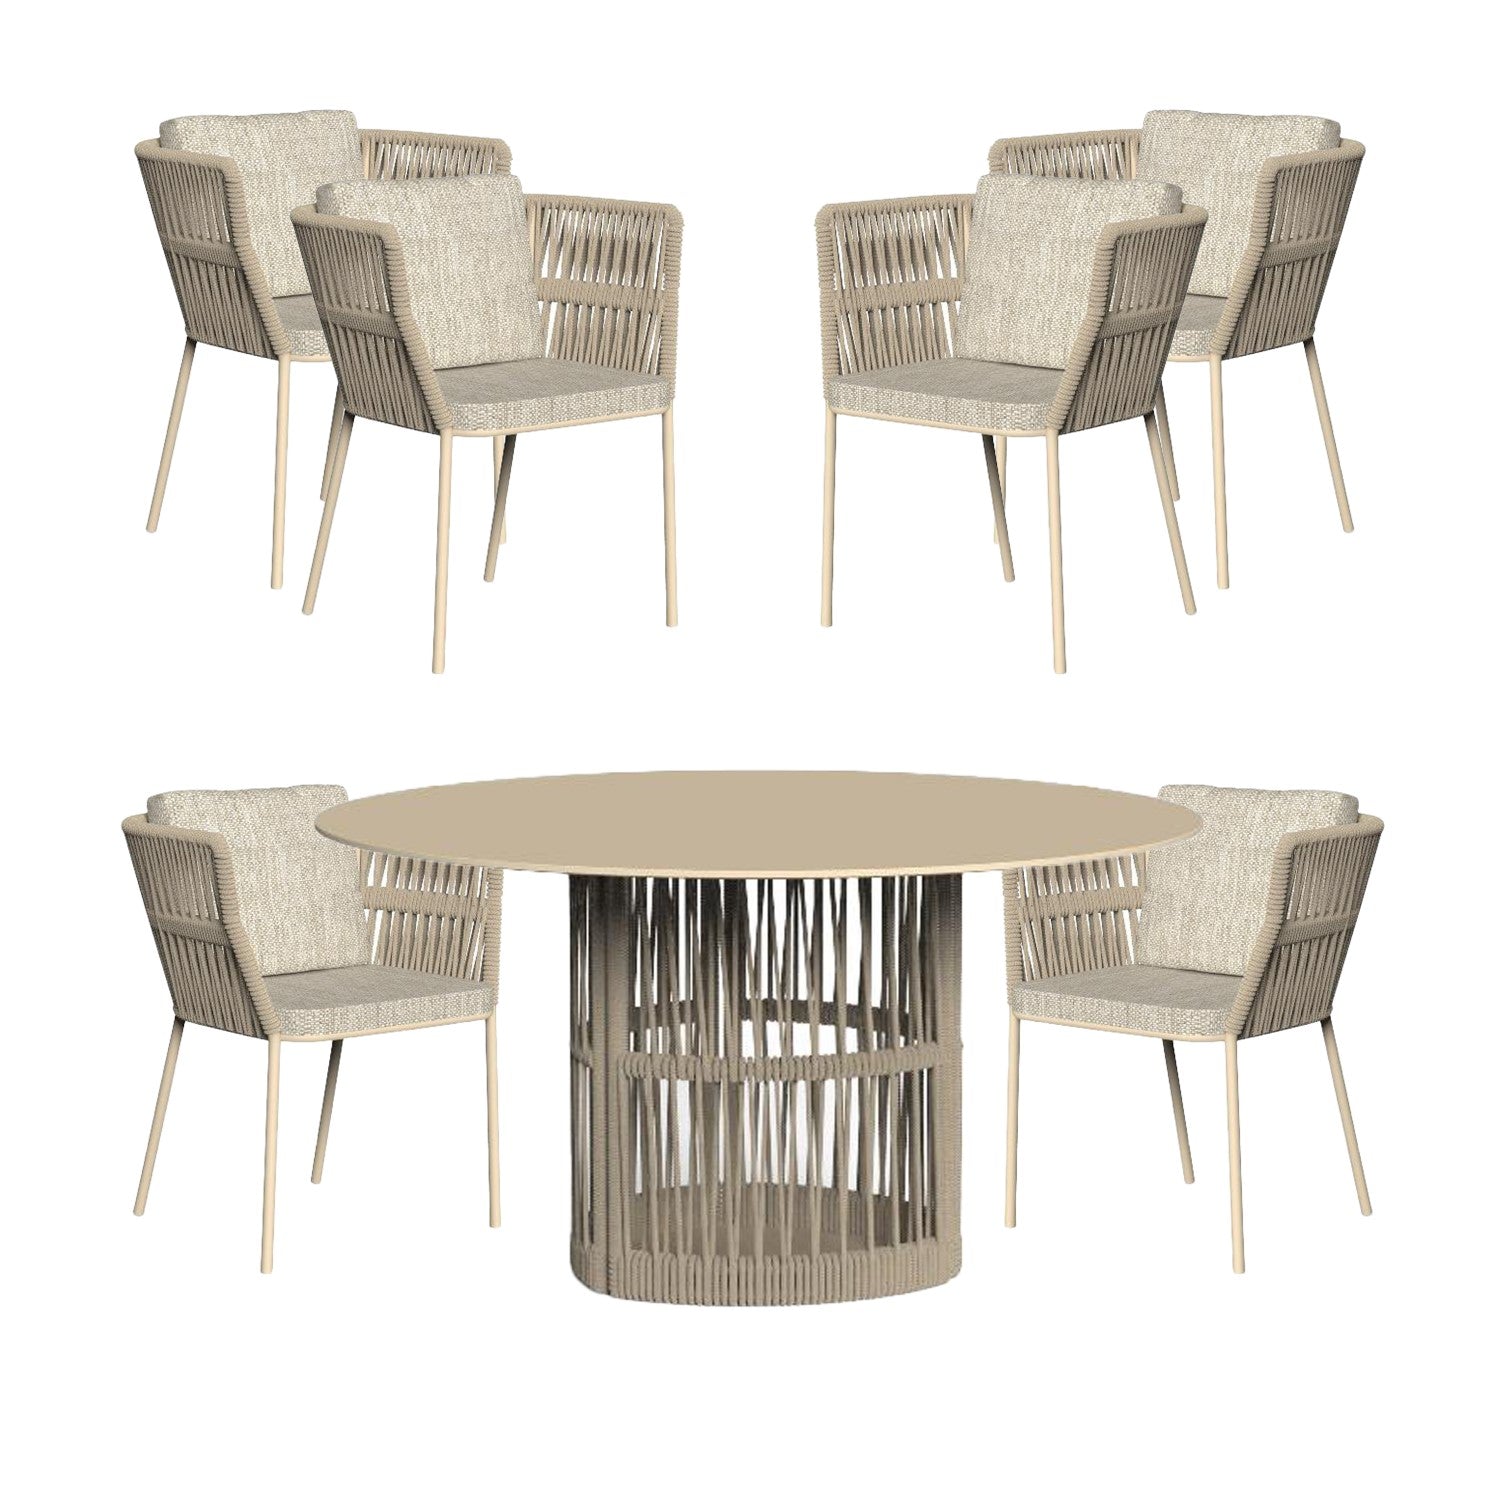 Cliff Dining 6 Chairs